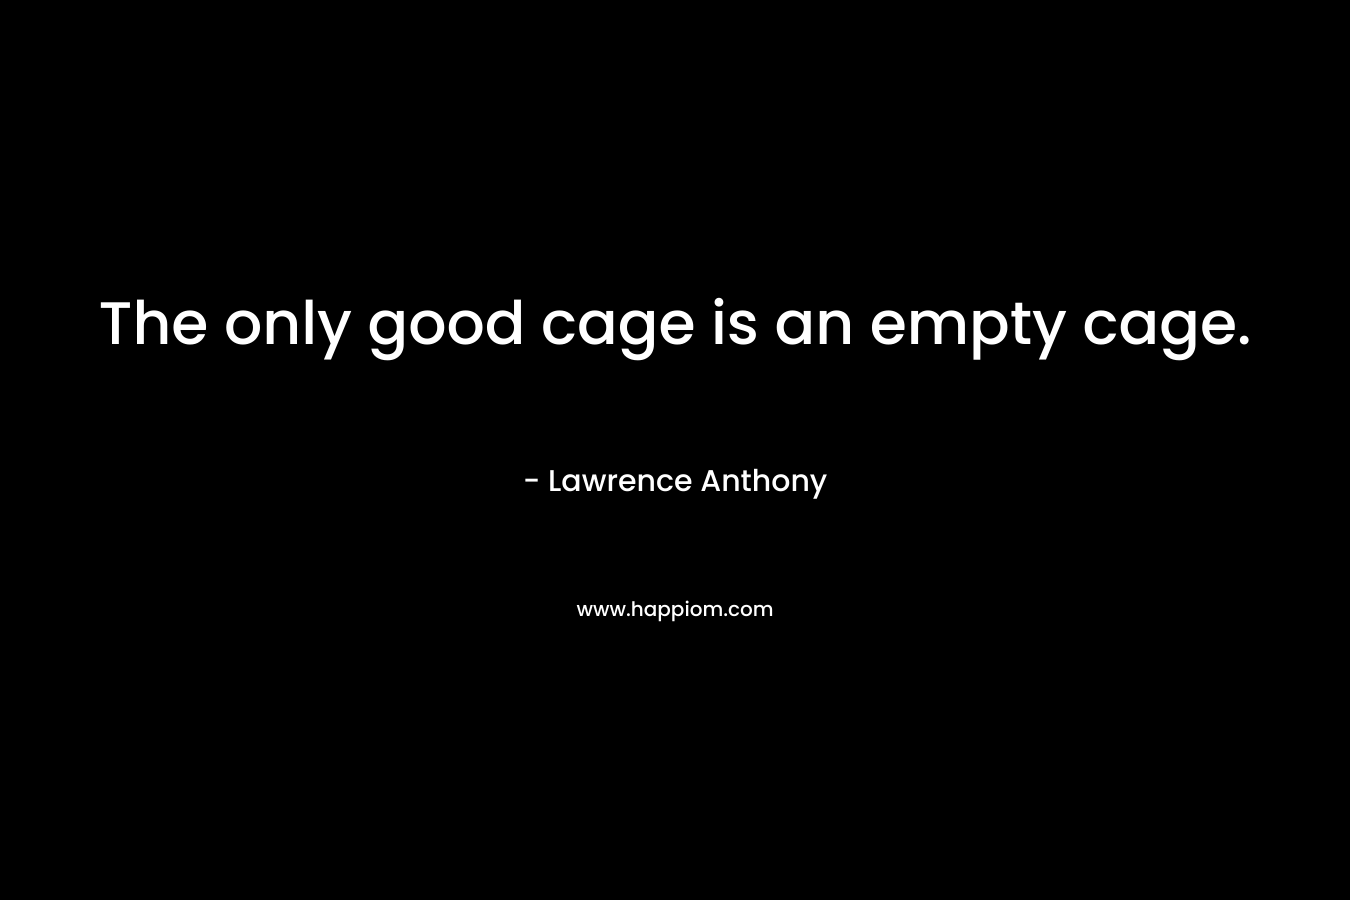 The only good cage is an empty cage. – Lawrence Anthony